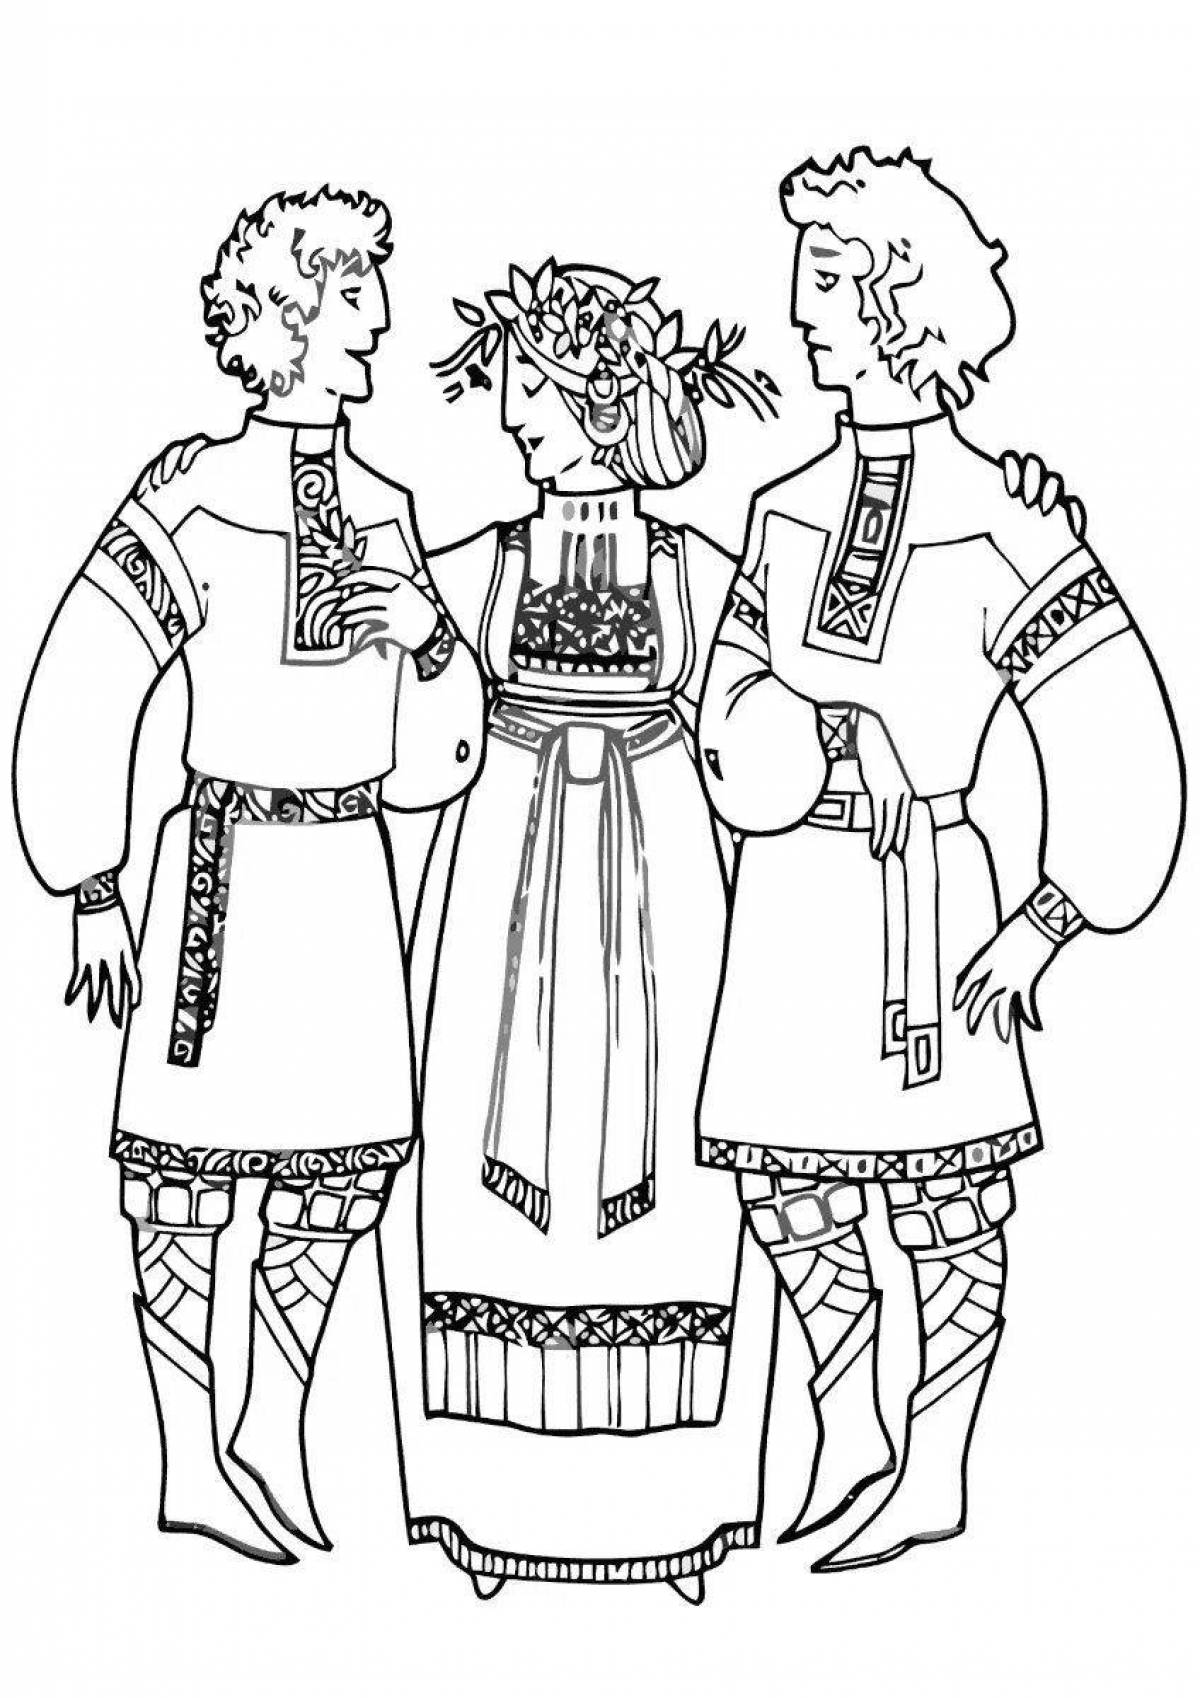 Coloring page stylish belarusian clothes for children